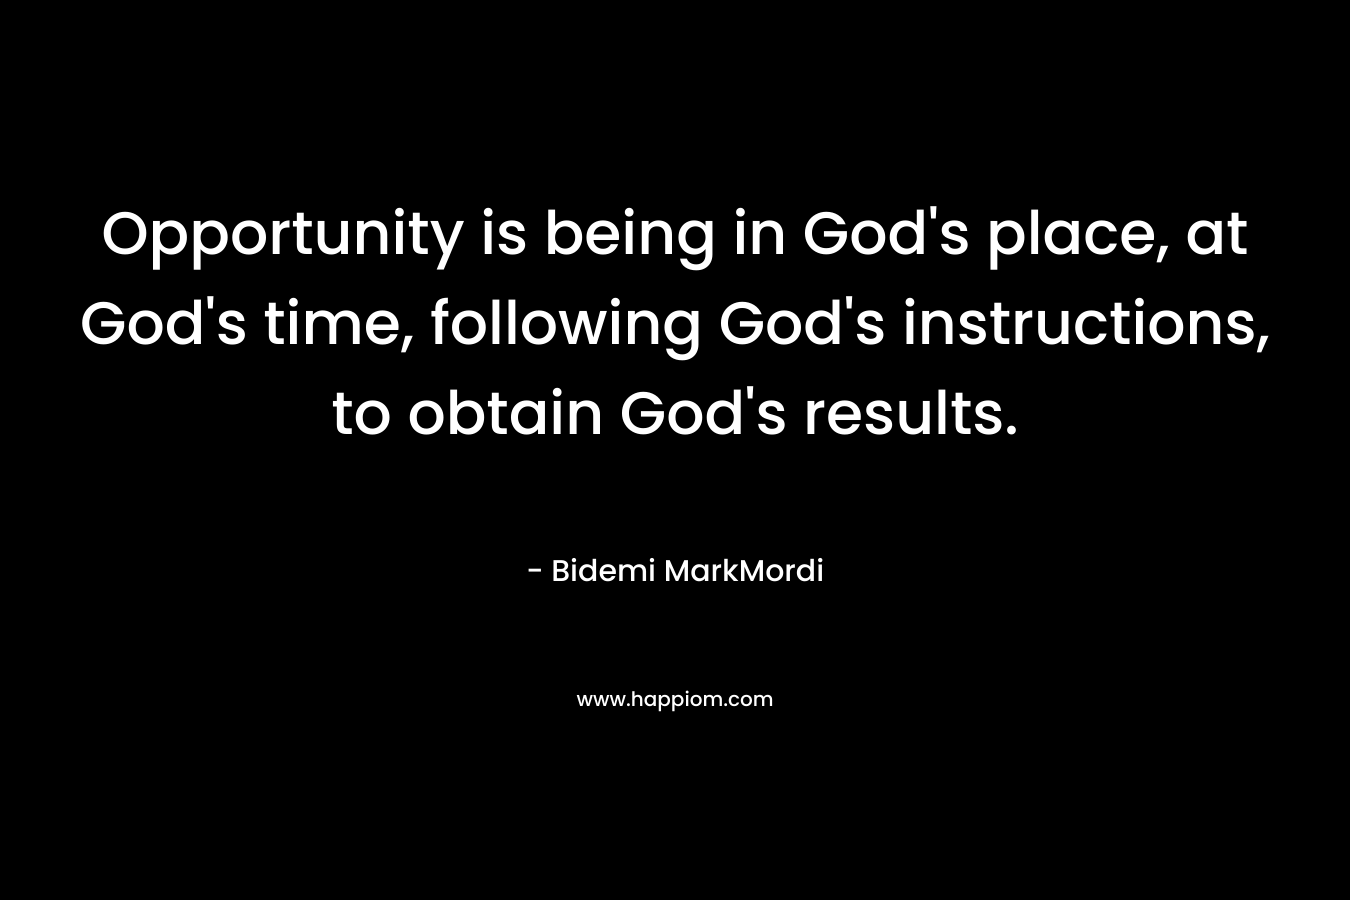 Opportunity is being in God’s place, at God’s time, following God’s instructions, to obtain God’s results. – Bidemi MarkMordi